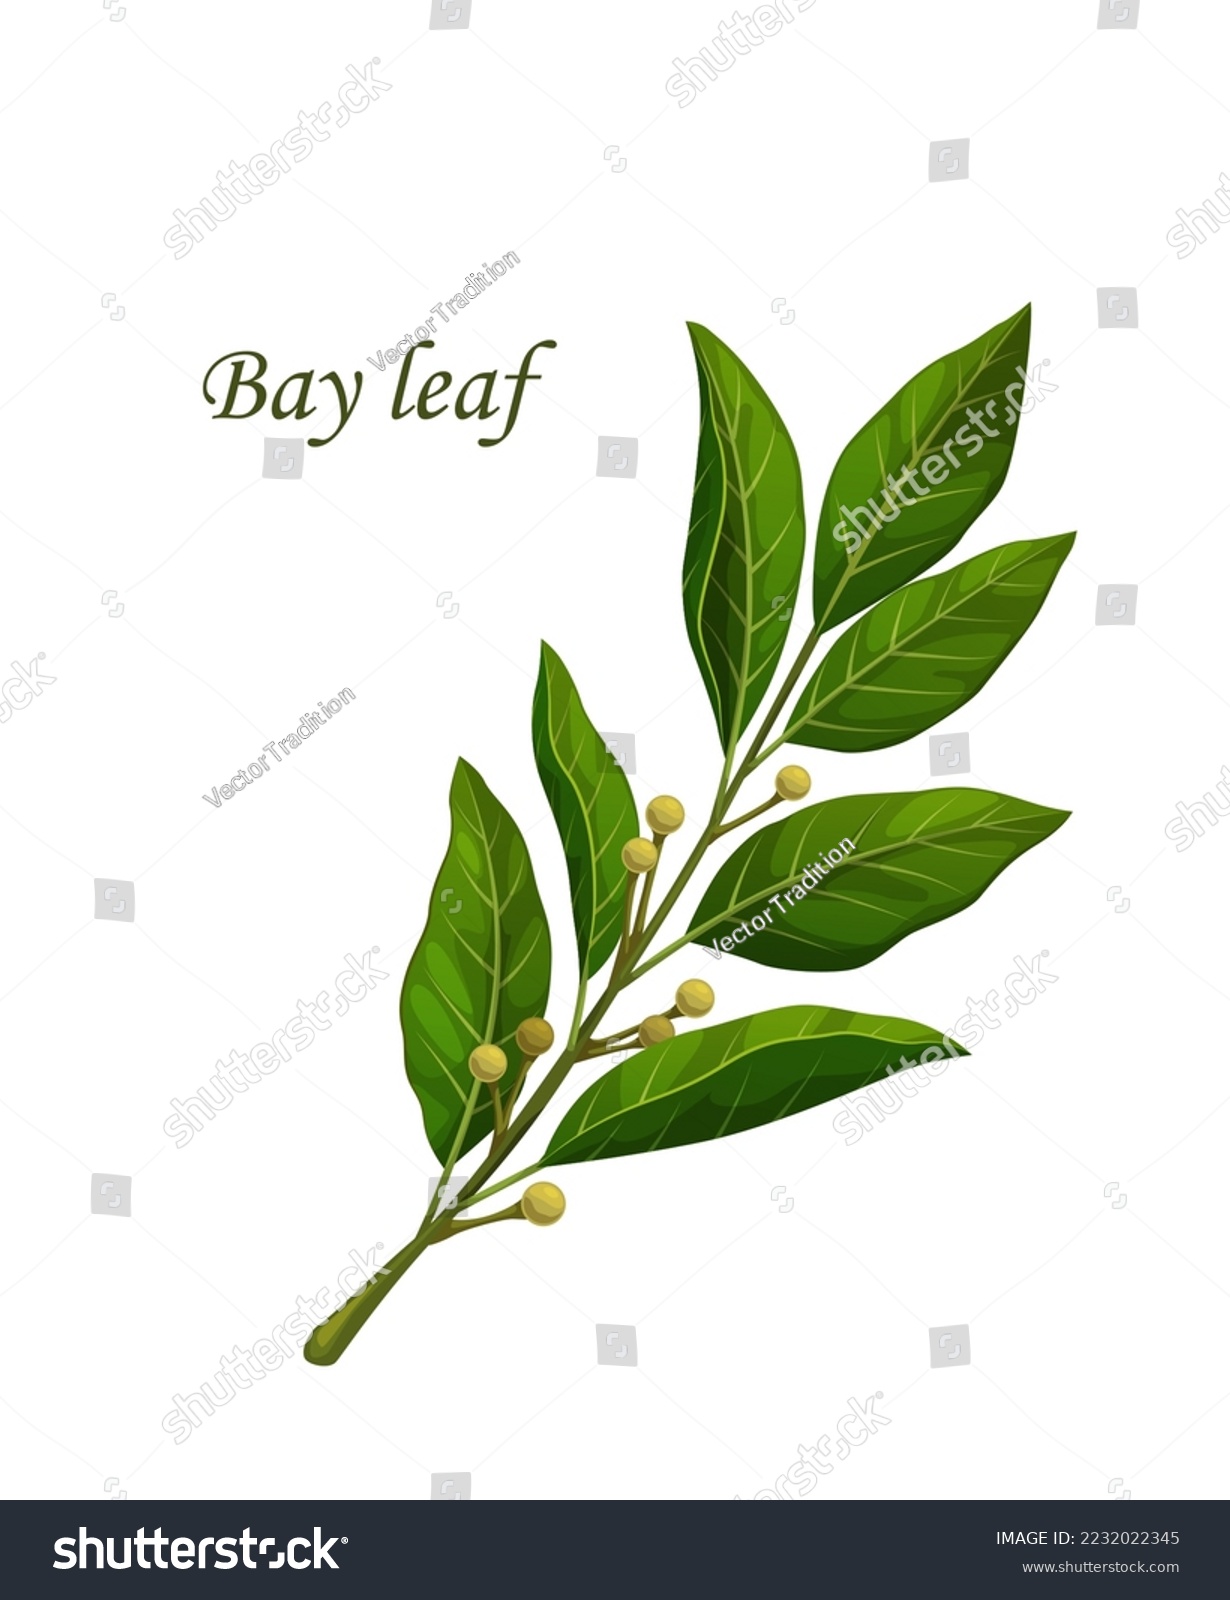 SVG of Bay leaves, herb seasoning or spice flavoring and herbal condiment, vector cooking ingredient. Bay leaf plant branch for spice and herbs product package, cooking recipe and healthy food spice svg